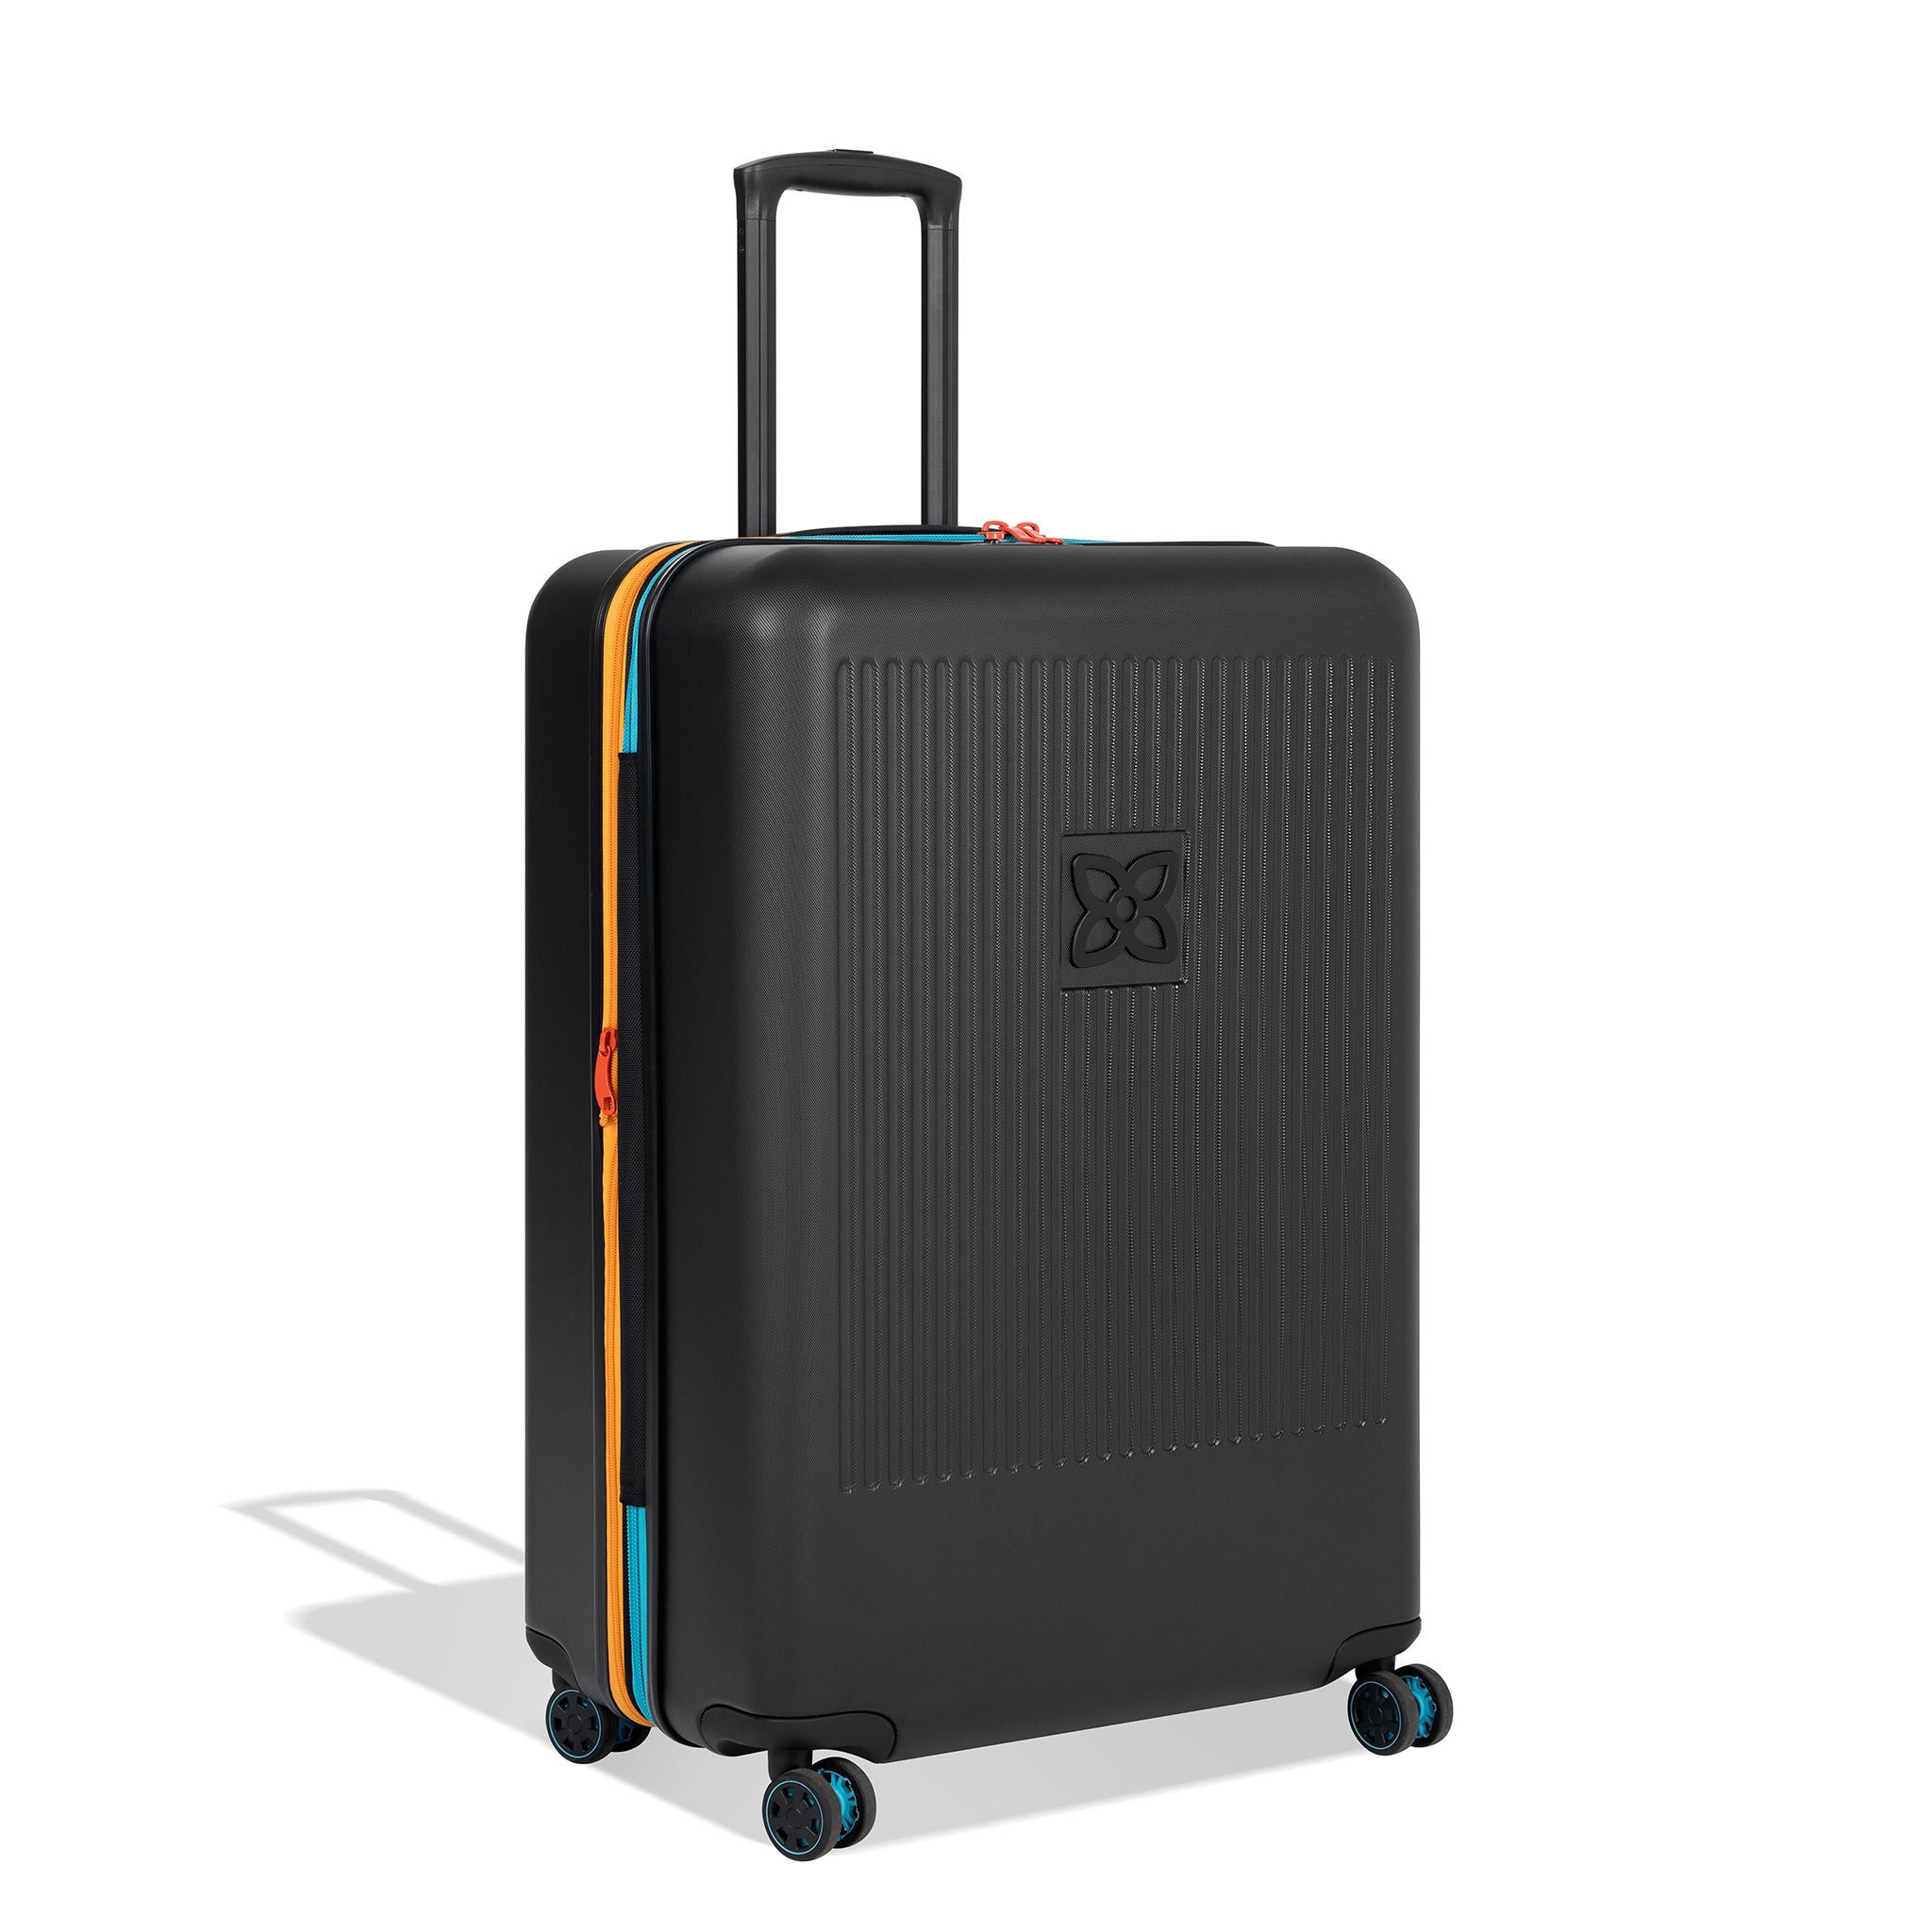 Angled front view of Sherpani hard-shell checked luggage, the Meridian in Chromatic. Meridian features include a retractable luggage handle, uncrushable exterior, TSA-approved locking zippers and four 36-degree spinner wheels. Chromatic color is primarily black with pops of color in red, yellow and blue. 